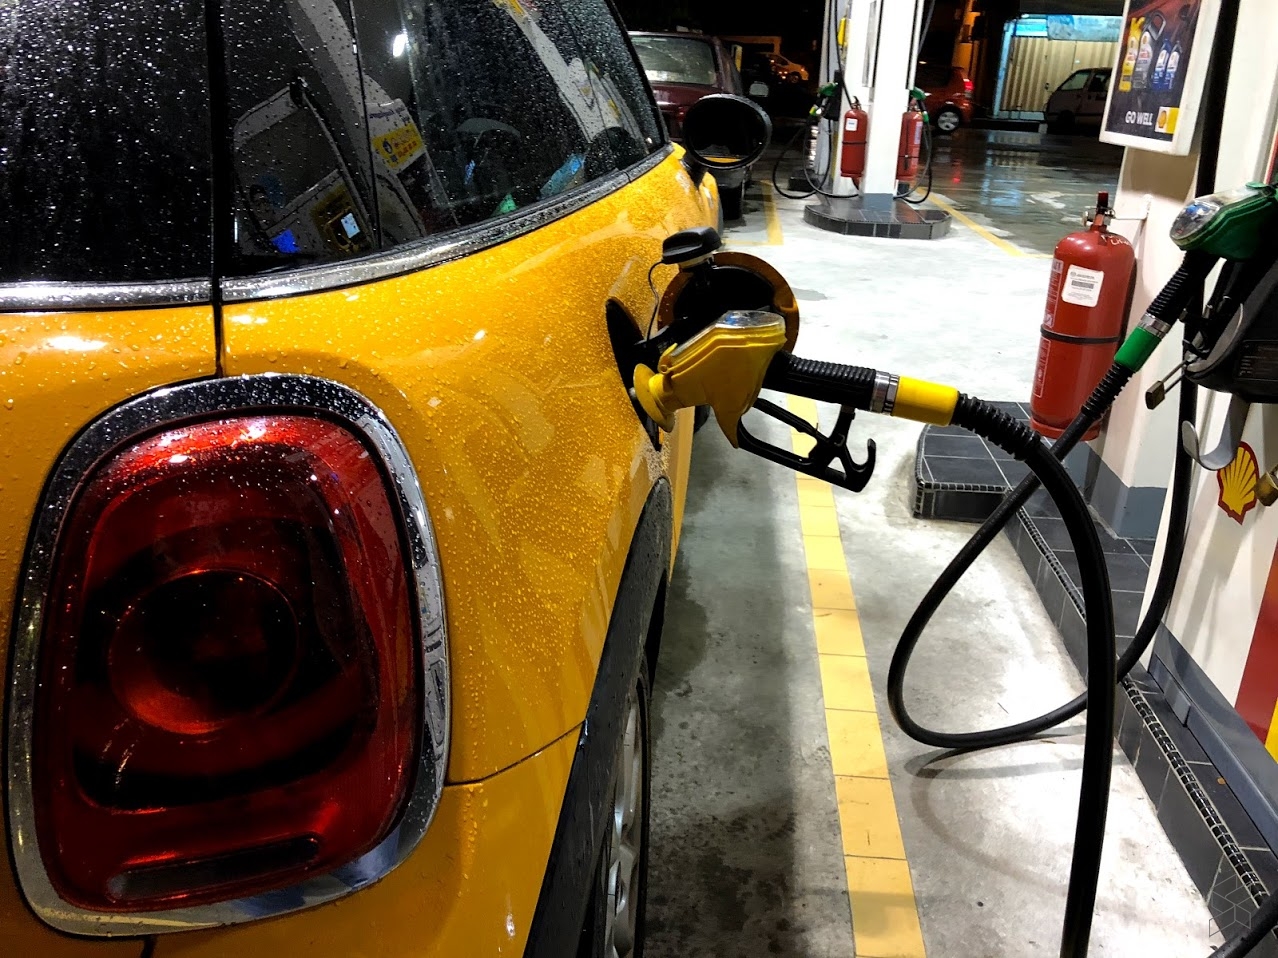 Government plans to implement targeted fuel subsidies soon